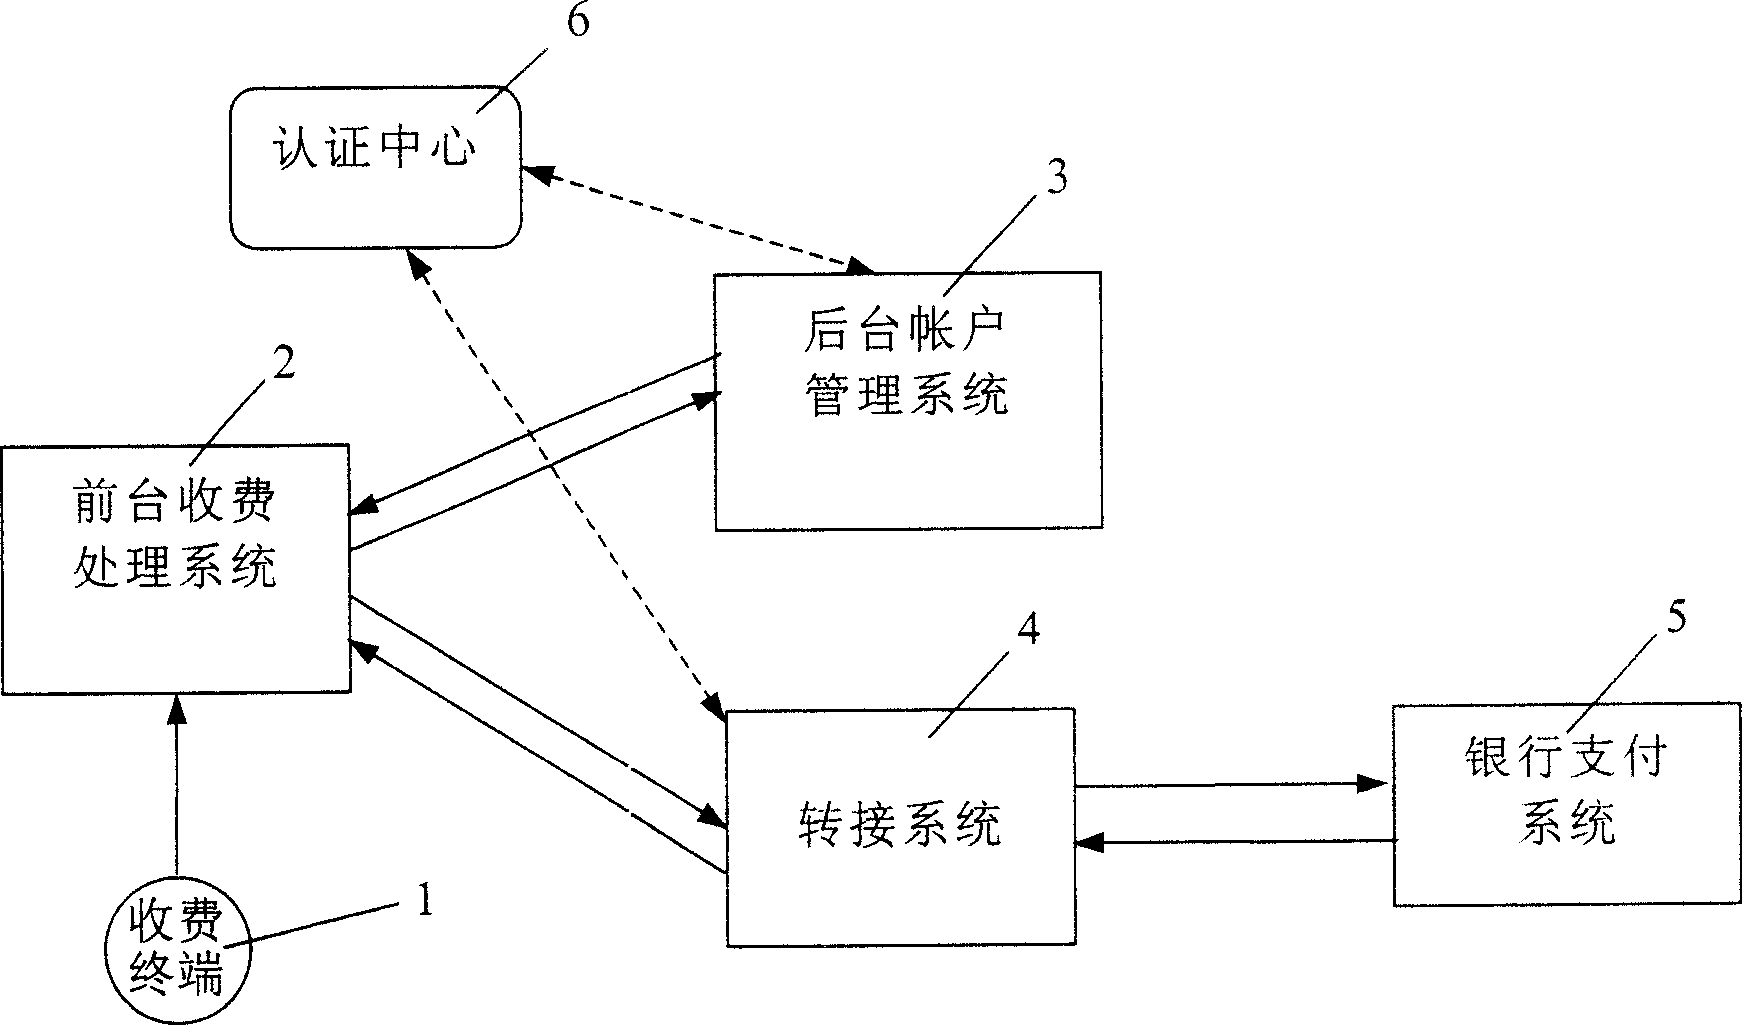 Charging system and settlement payment method